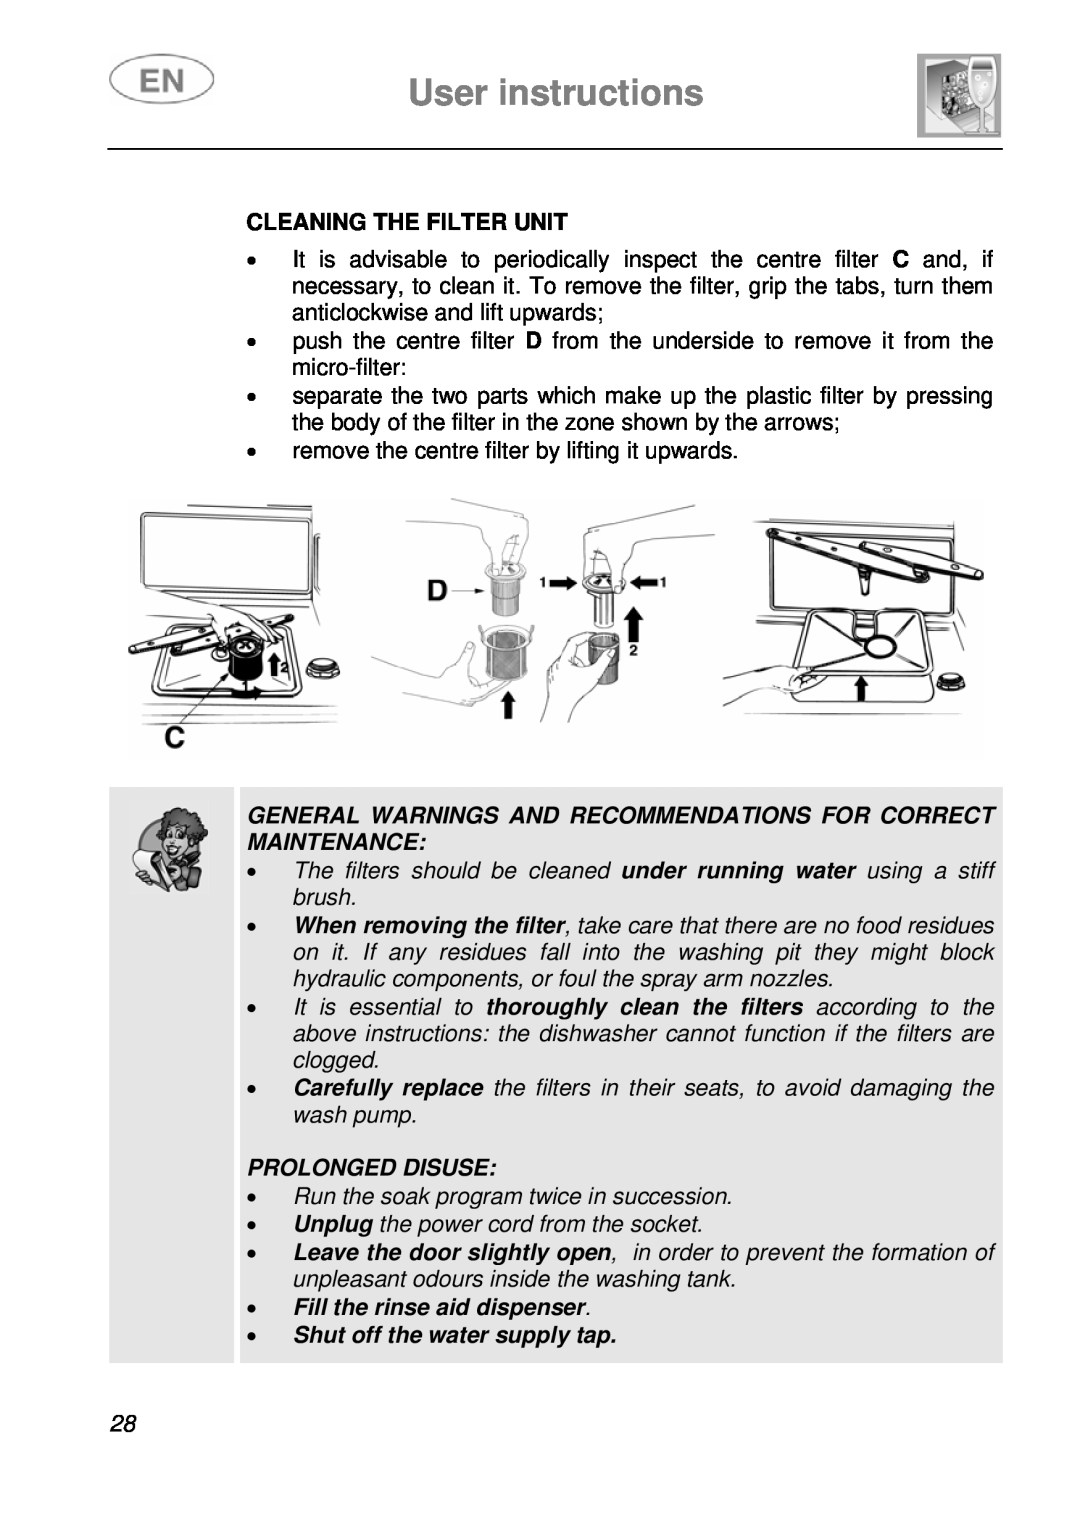 Smeg STA6246, STA6245 User instructions, Cleaning The Filter Unit, Prolonged Disuse, Fill the rinse aid dispenser 